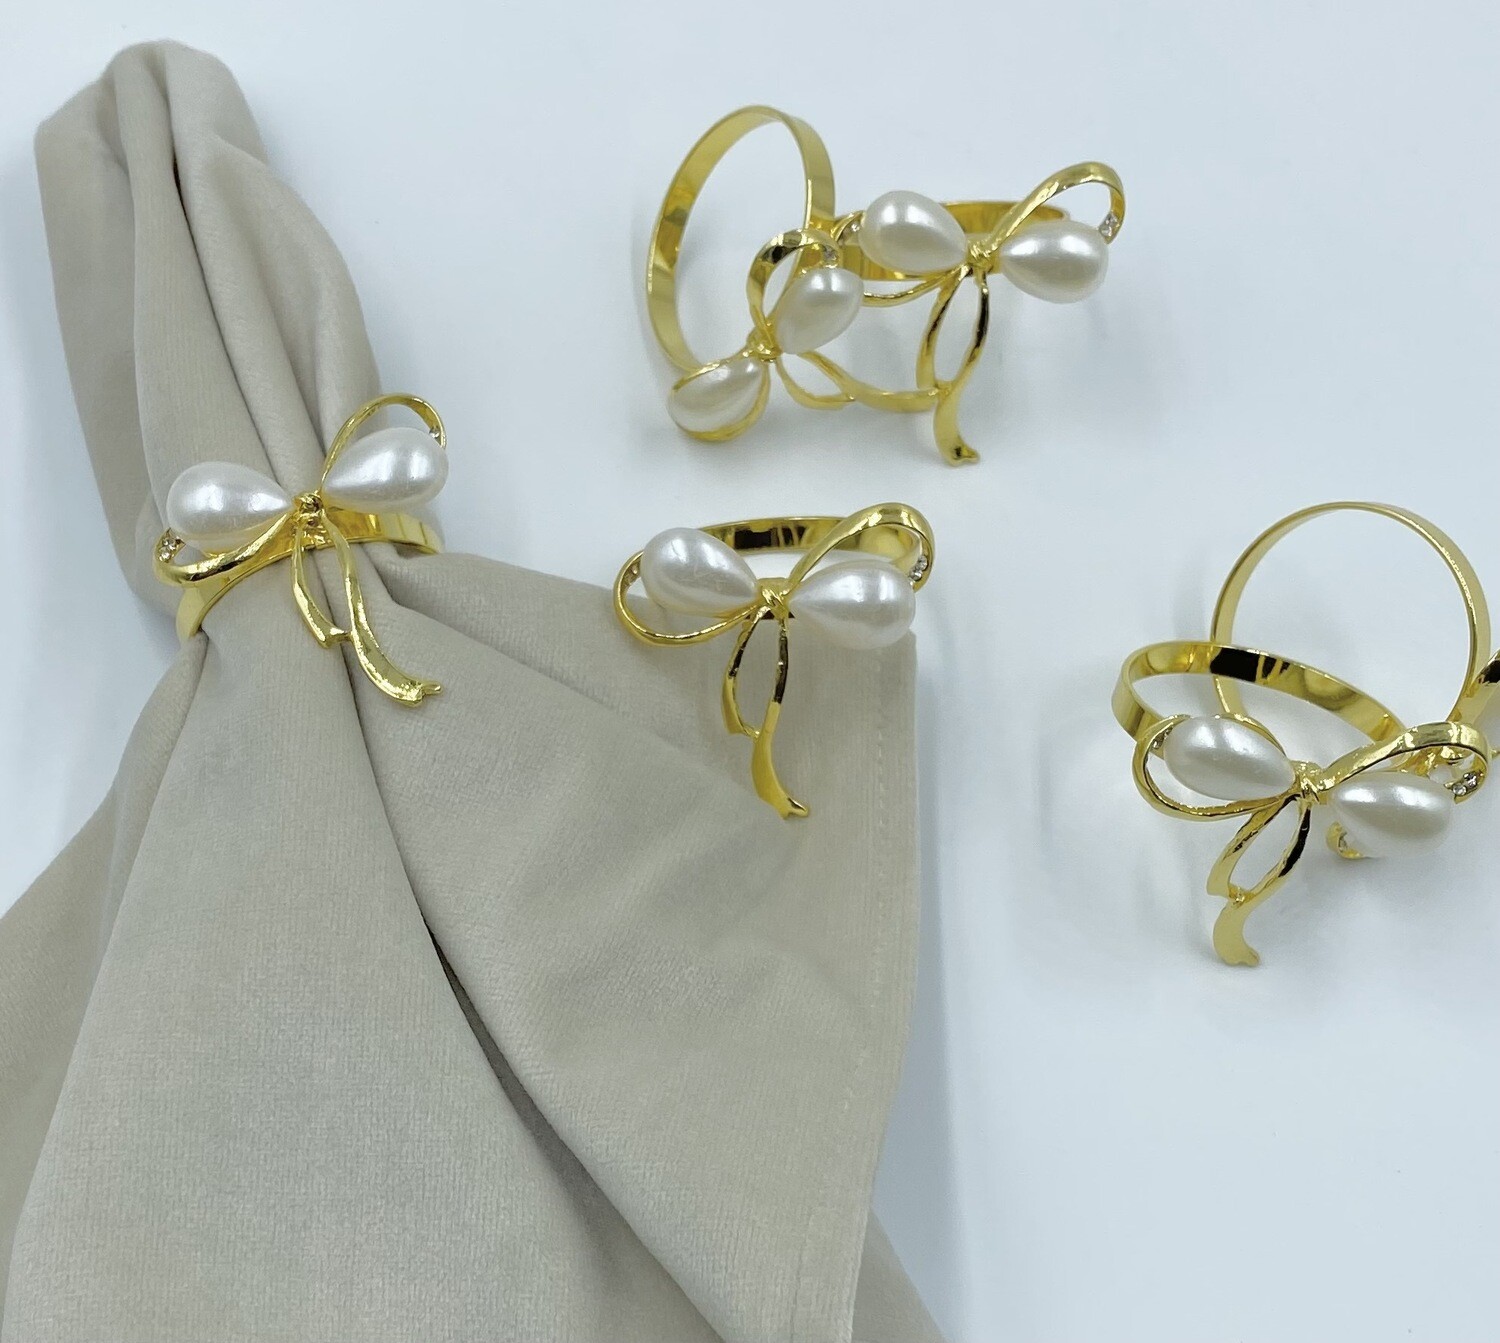 Gold Ribbon with Pearl detail Napkin rings (set of 6)